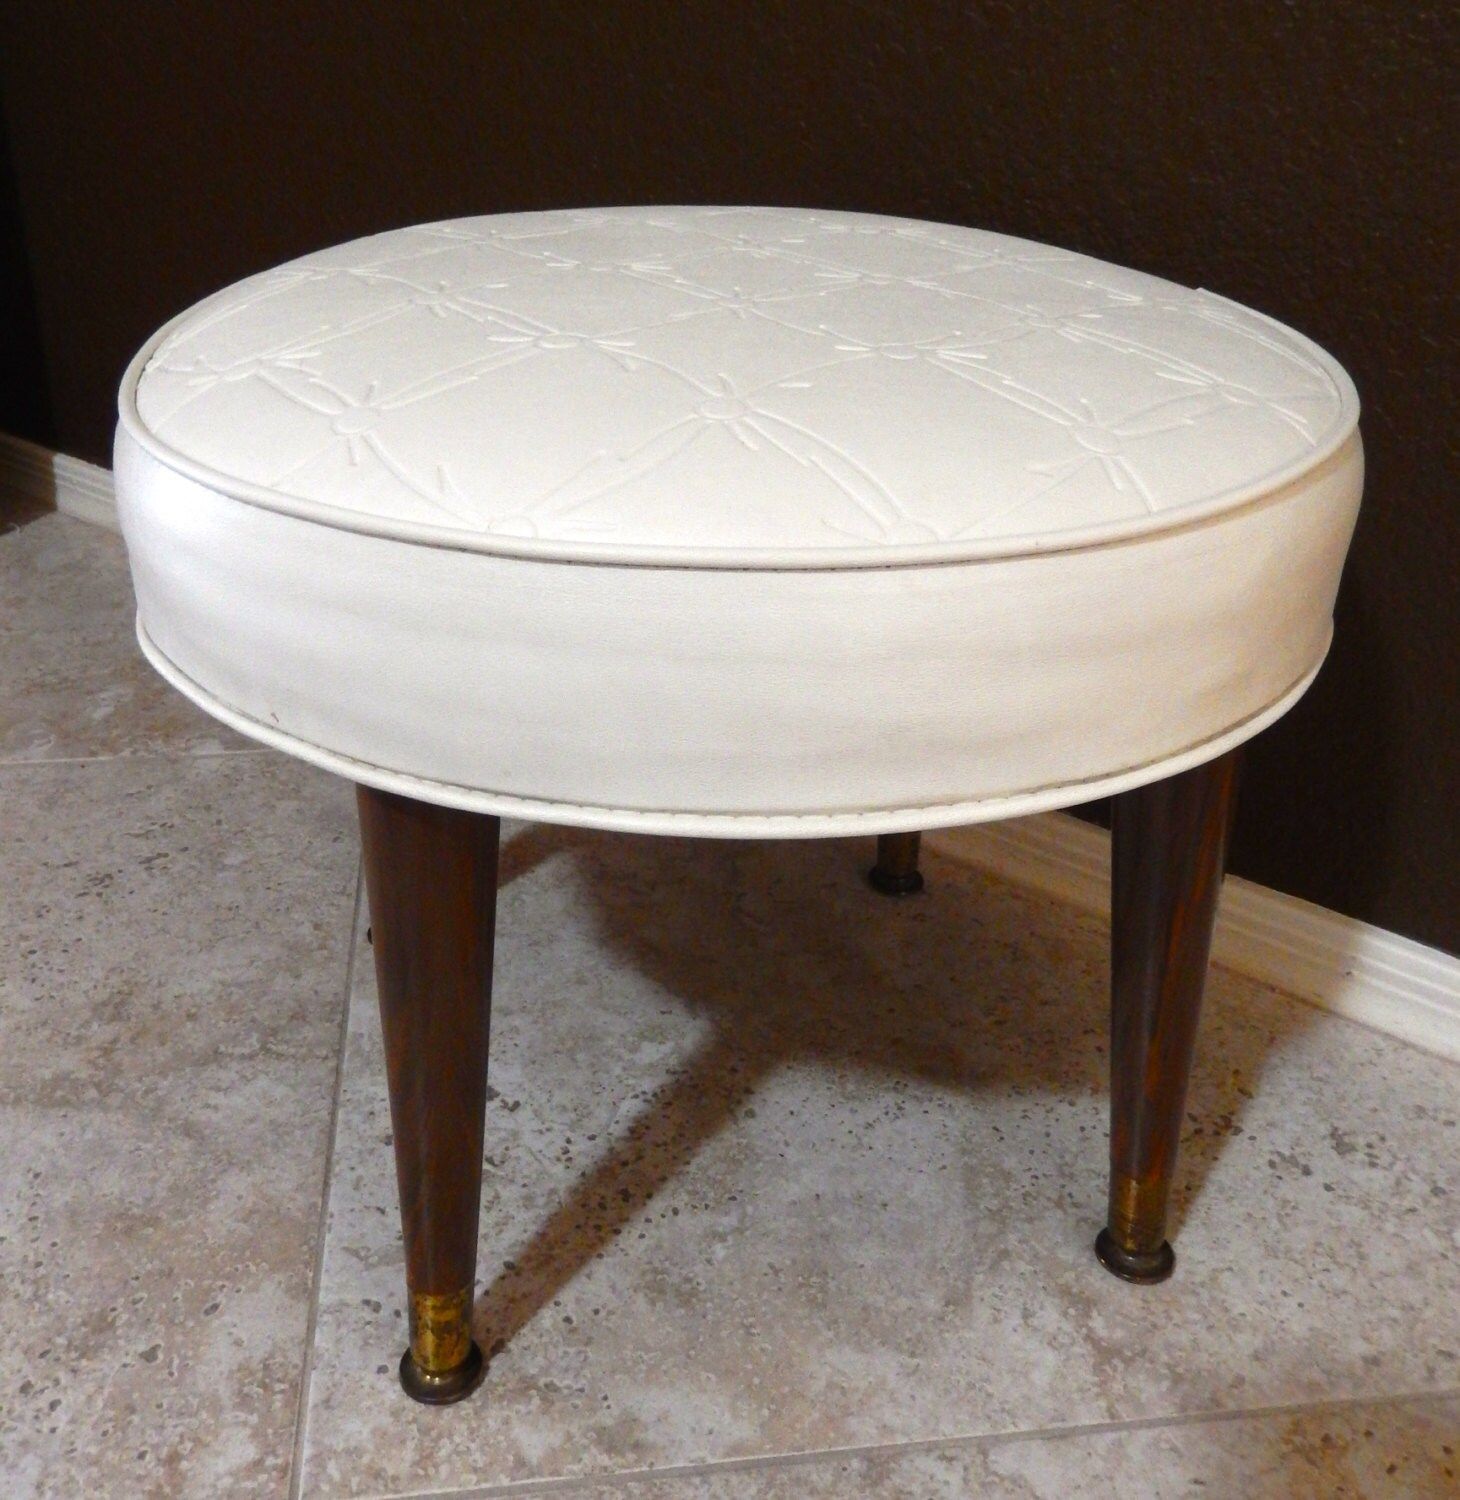 Mid Century Modern Round White Patterned Vinyl Ottoman Foot Stool Pertaining To Modern Gibson White Small Round Ottomans (View 1 of 20)